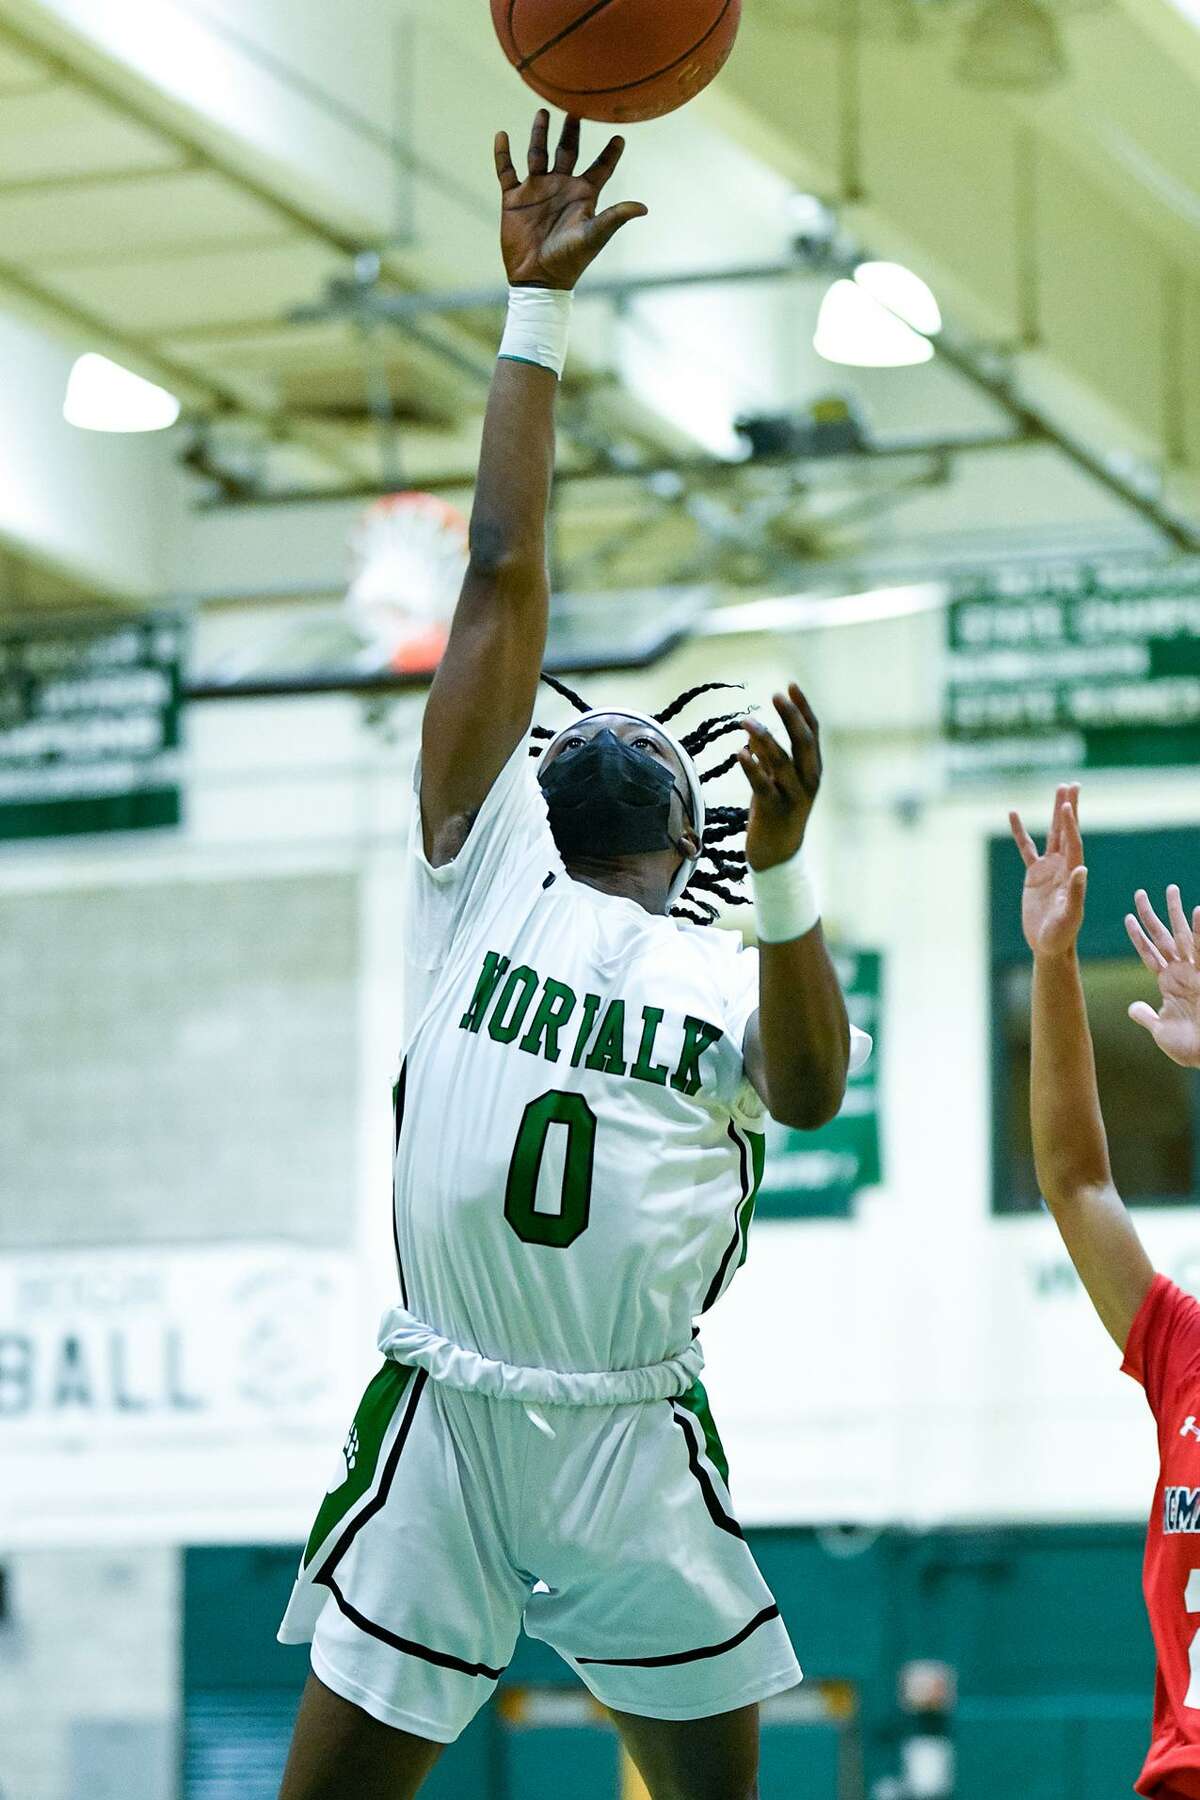 Norwalk’s Terrell Holley goes up for a shot during a recent game at Norwalk High.